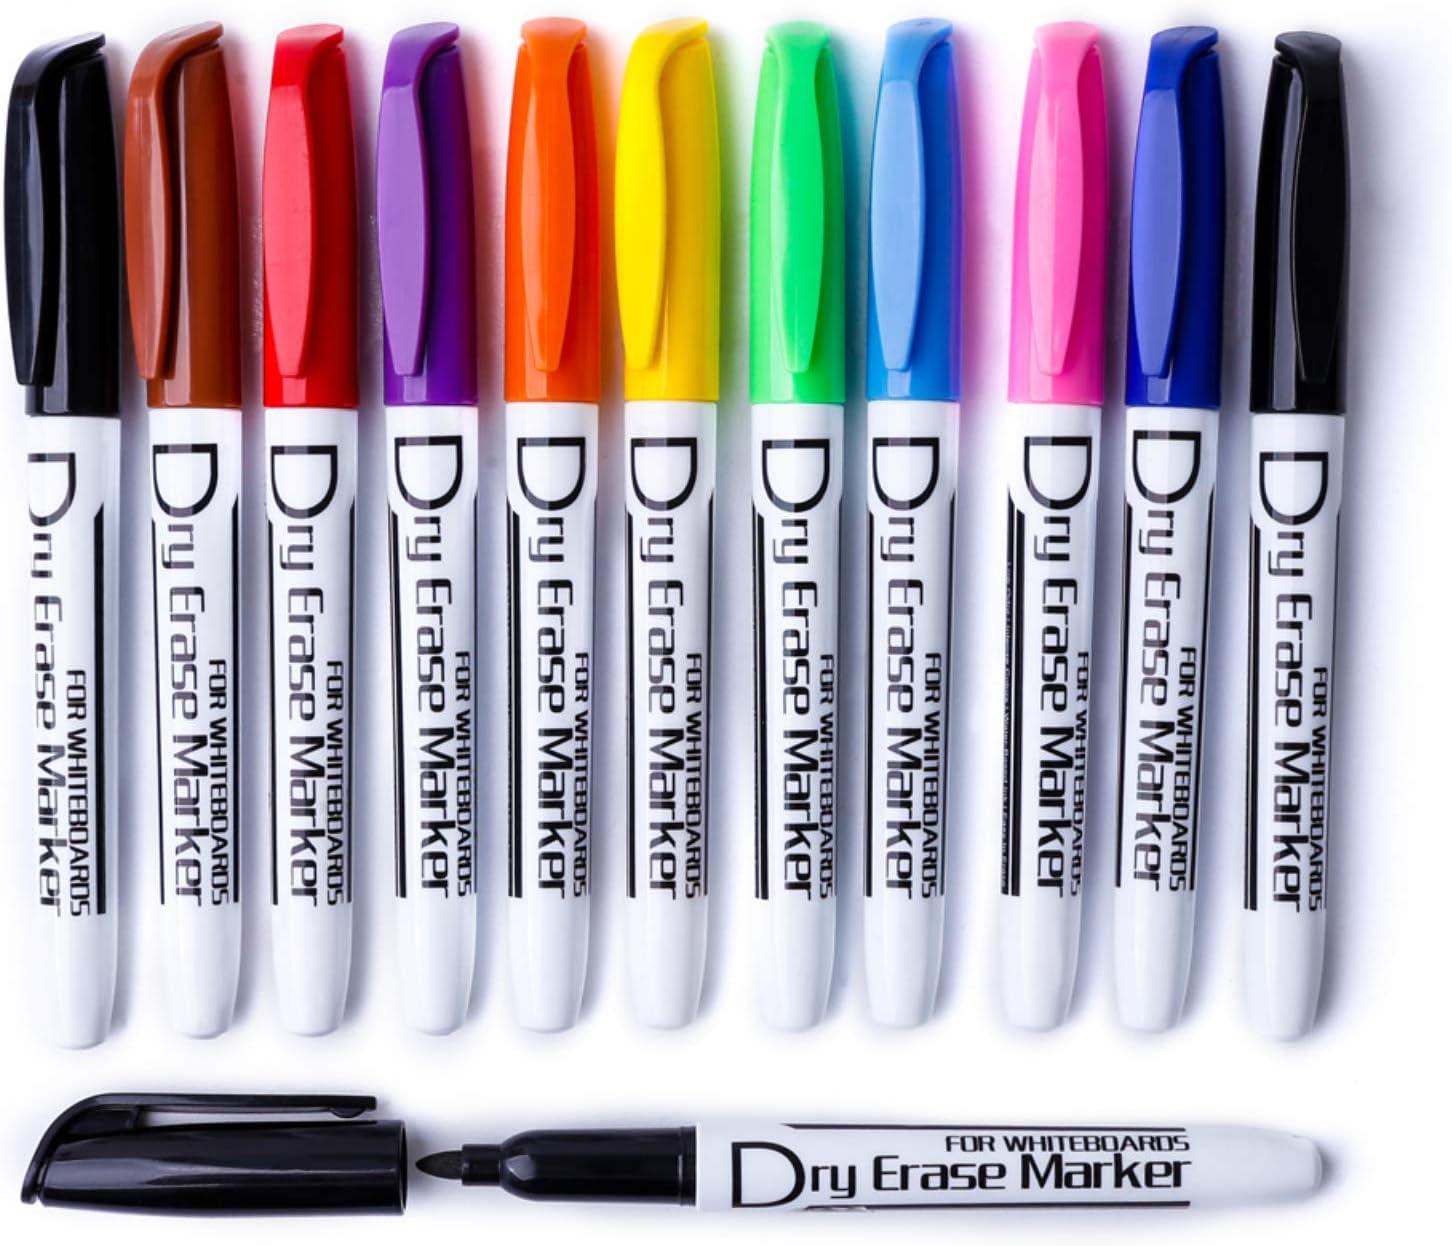 volcanics dry erase markers low odor fine whiteboard markers thin box of 12 10 assorted colors  volcanics